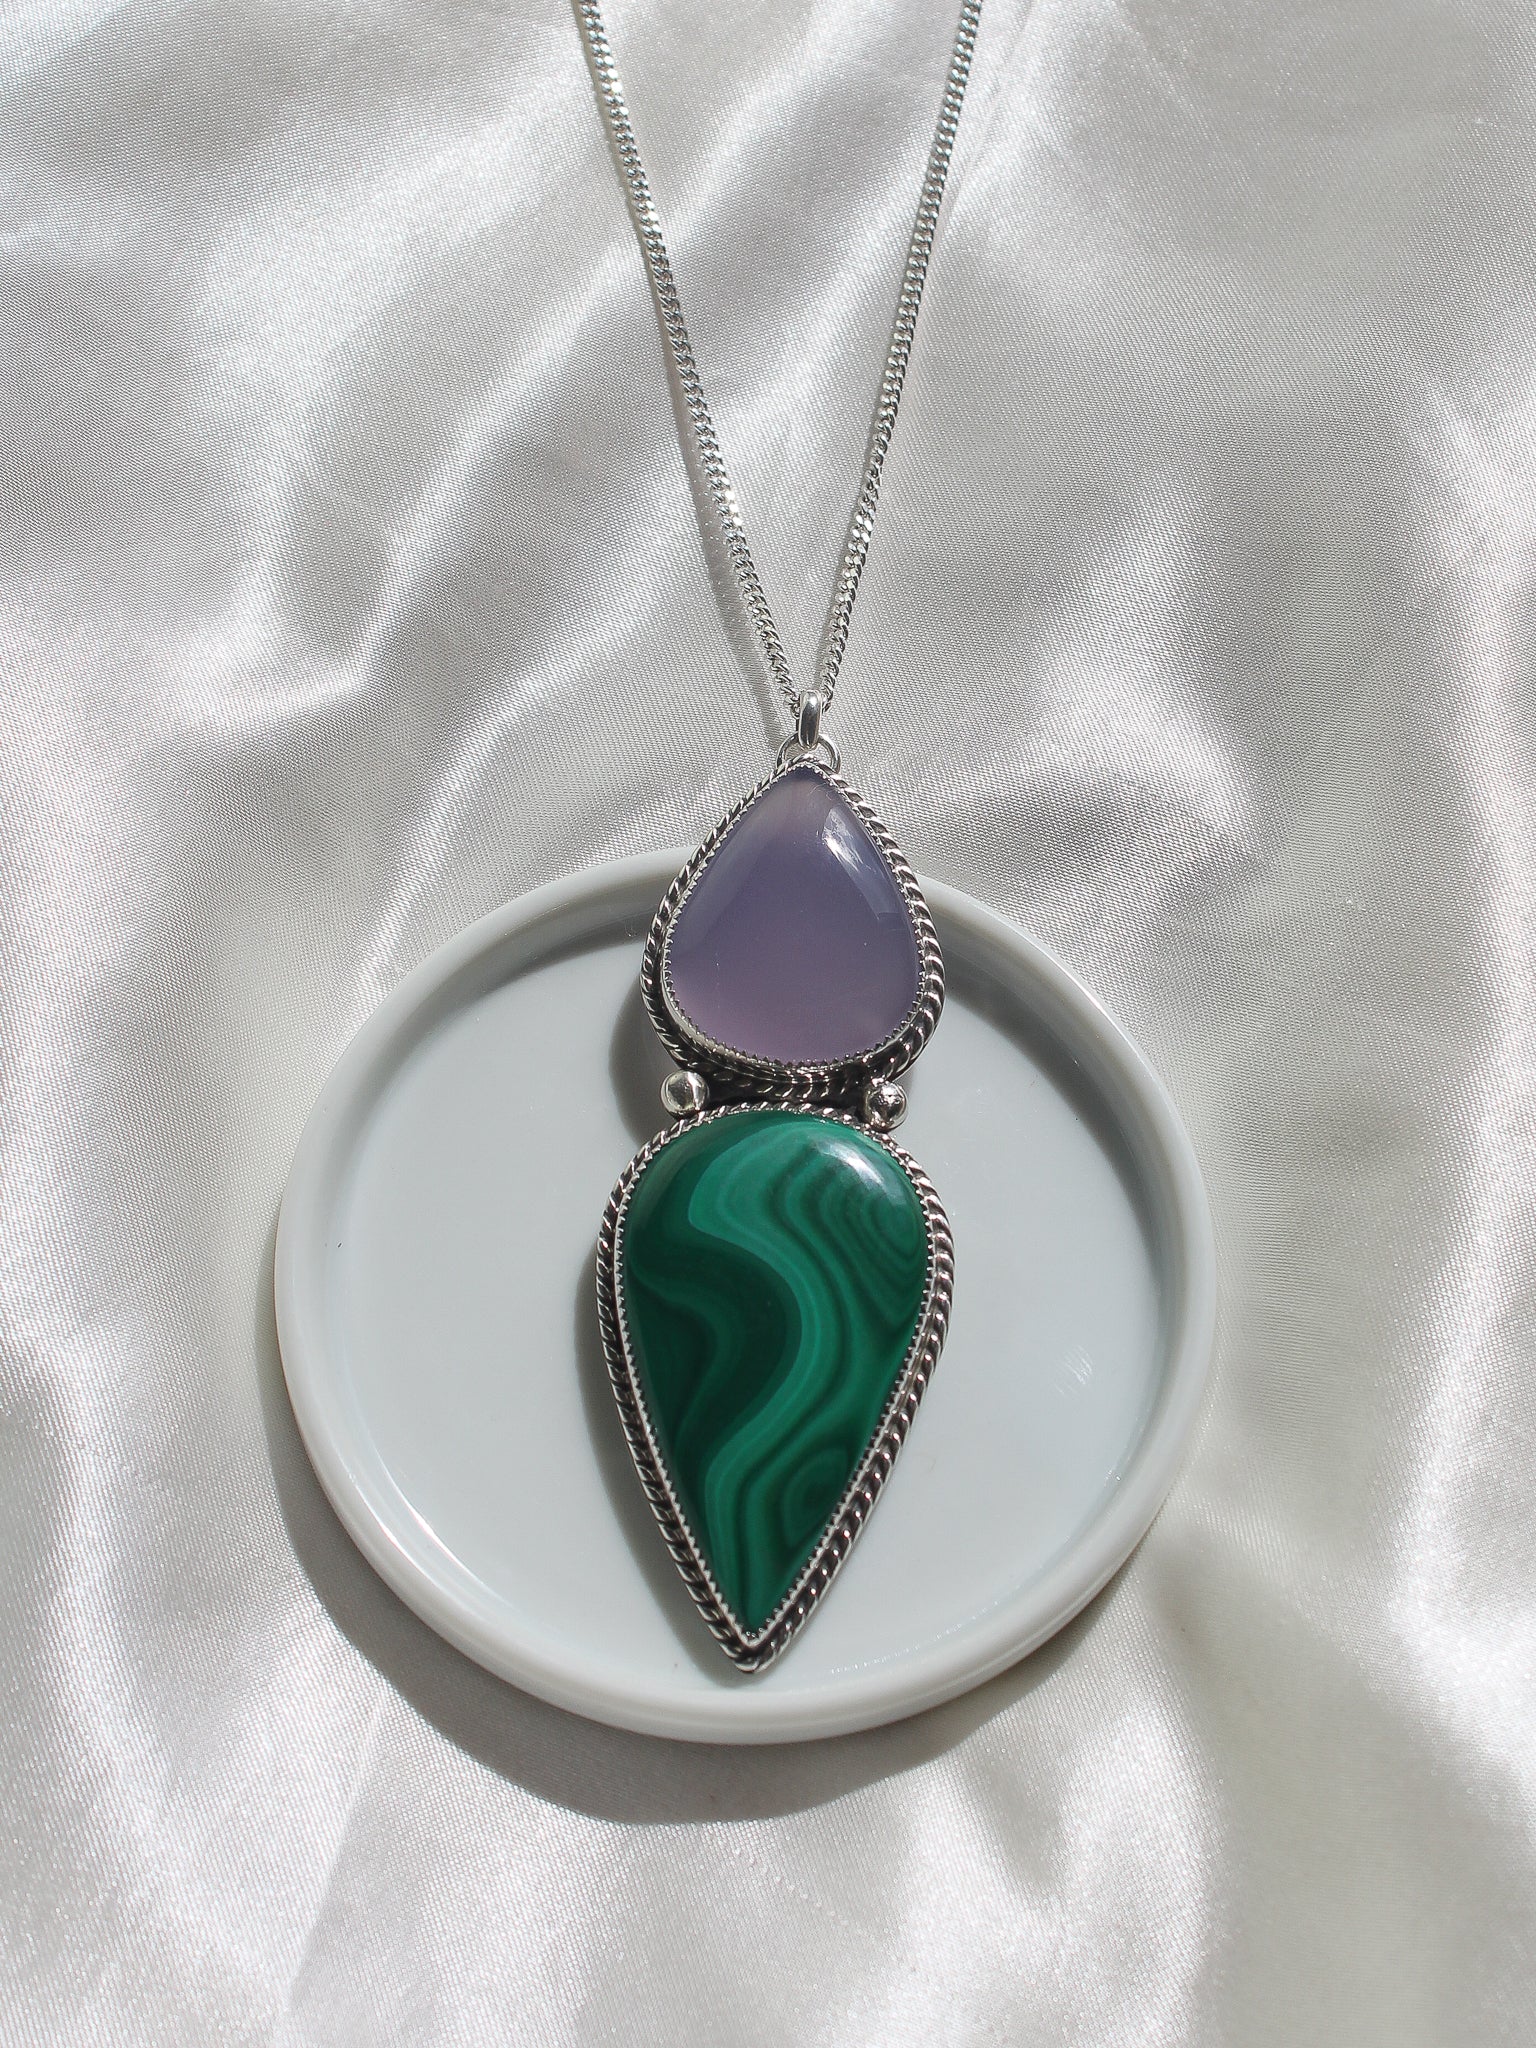 Large handmade 925 sterling silver pendant with lavender chalcedony and malachite lily and William jewelry